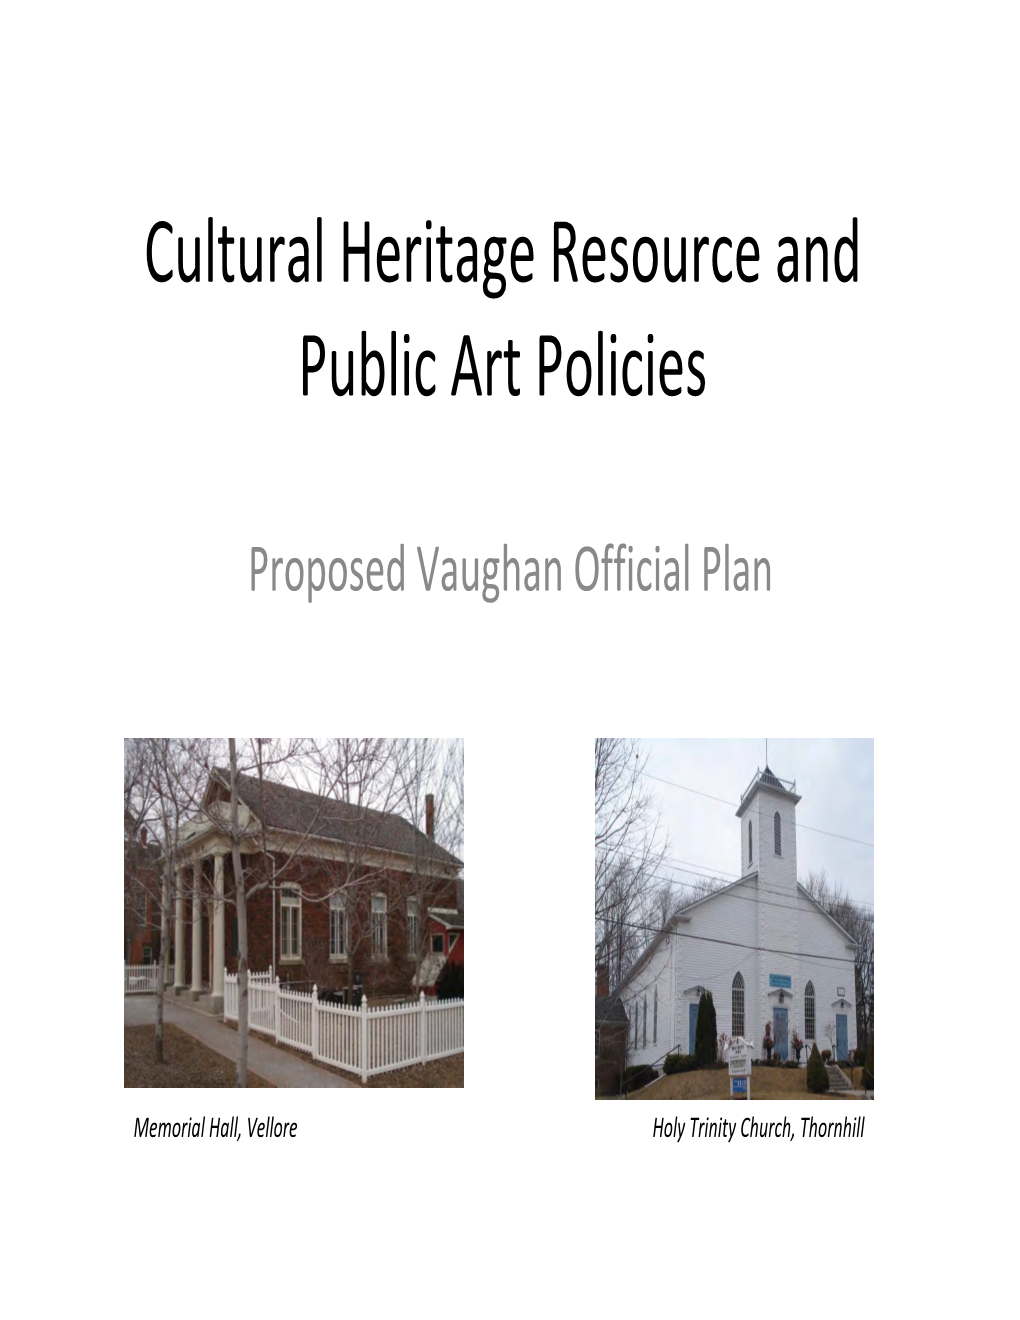 Cultural Heritage Resource and Public Art Policies